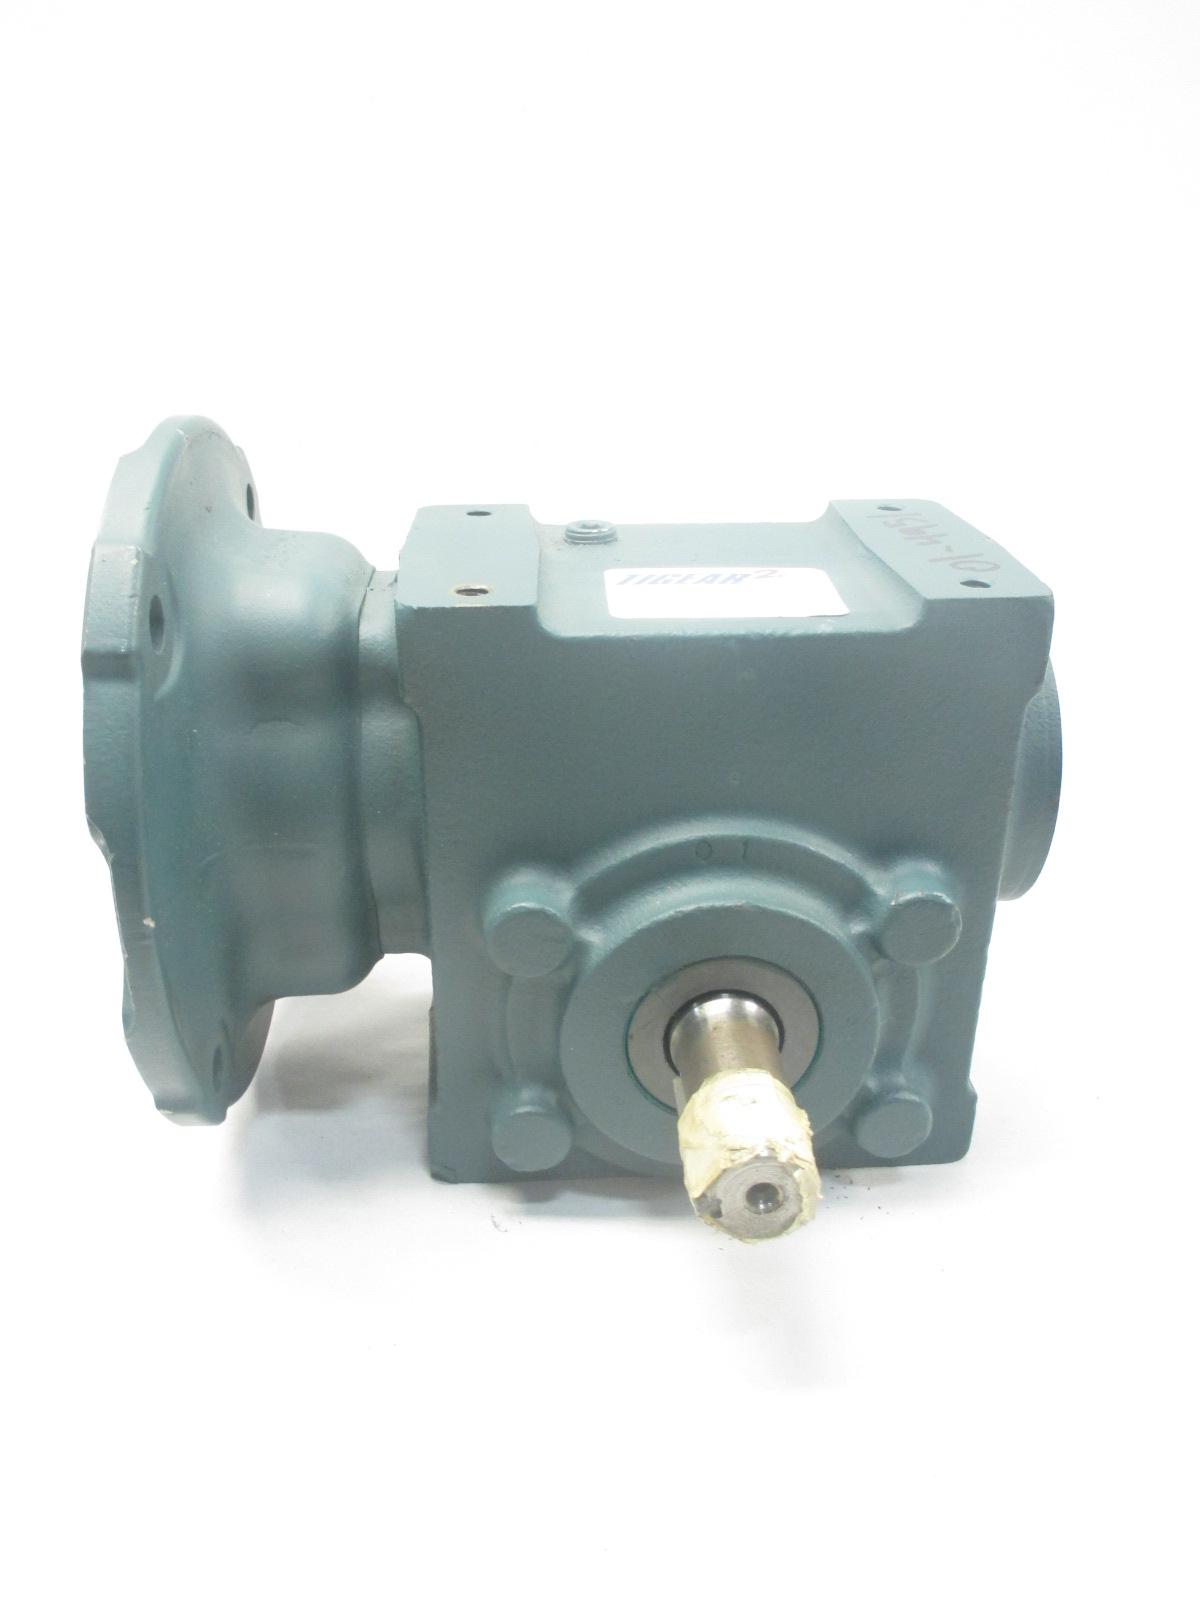 NEW OTHER Tigear2 Dodge 10:1 17Q10R56 Gearbox Speed Reducer GEA2022 